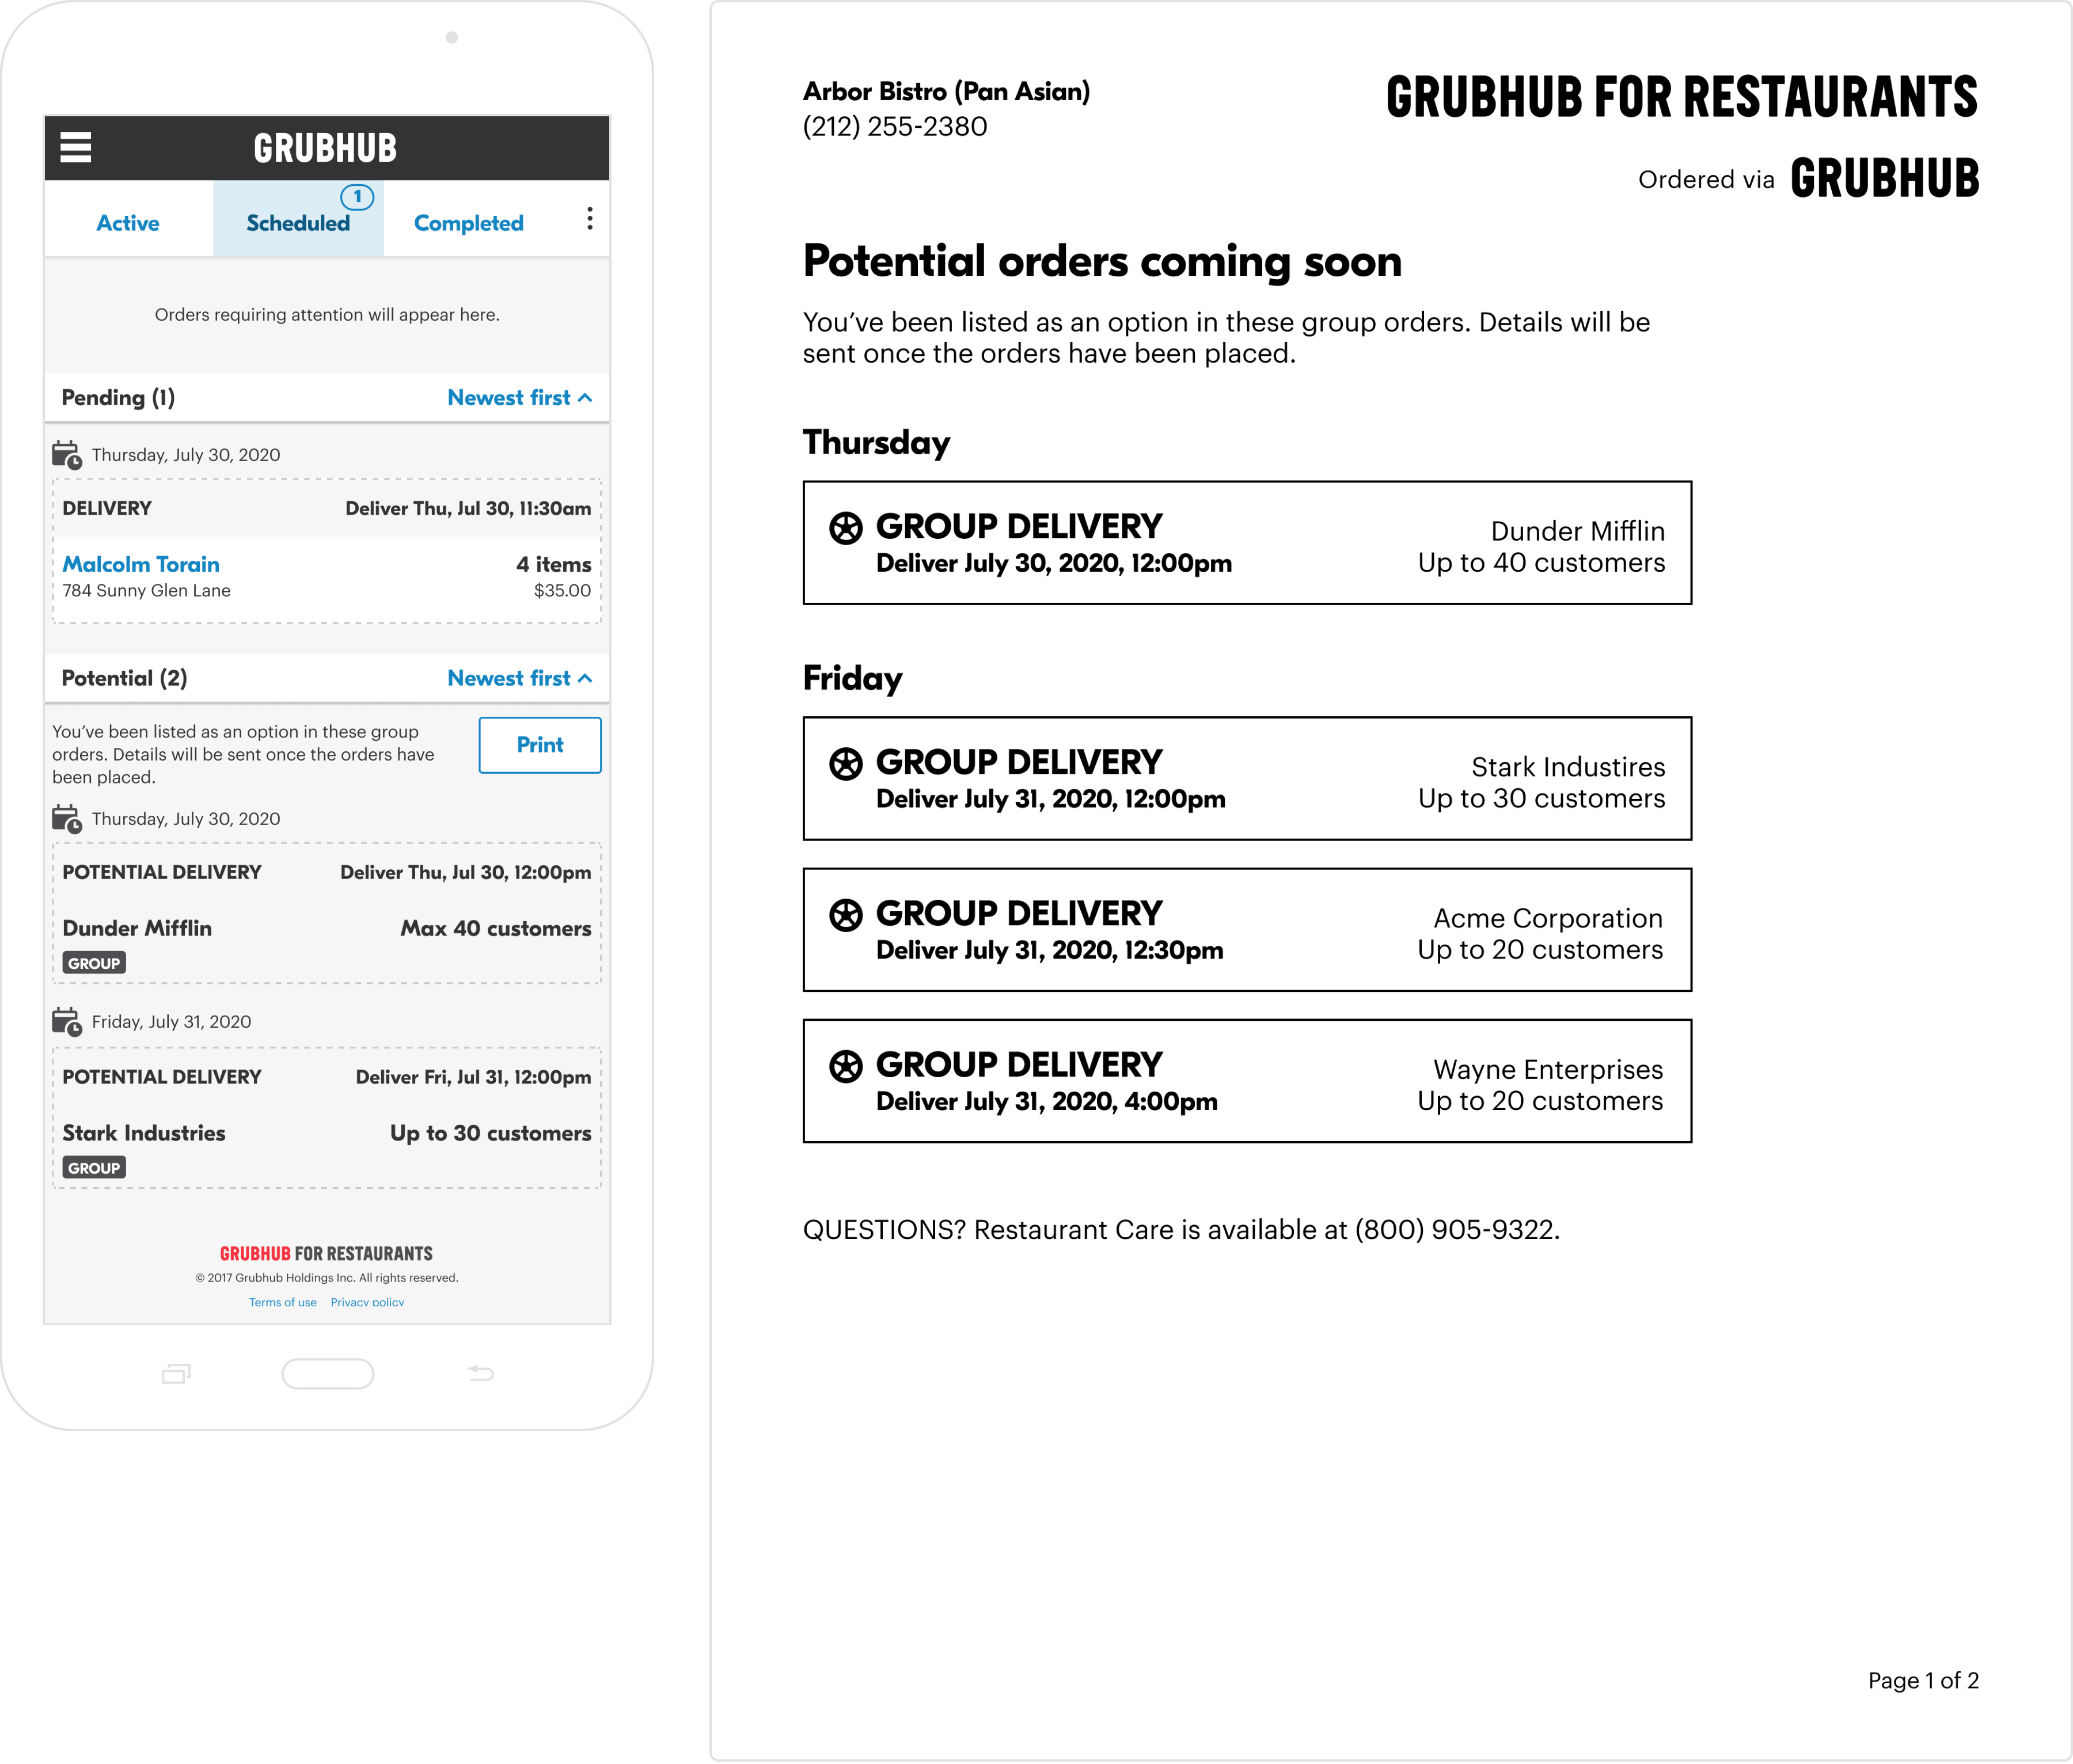 Images of UI and print-out notification for orders coming soon